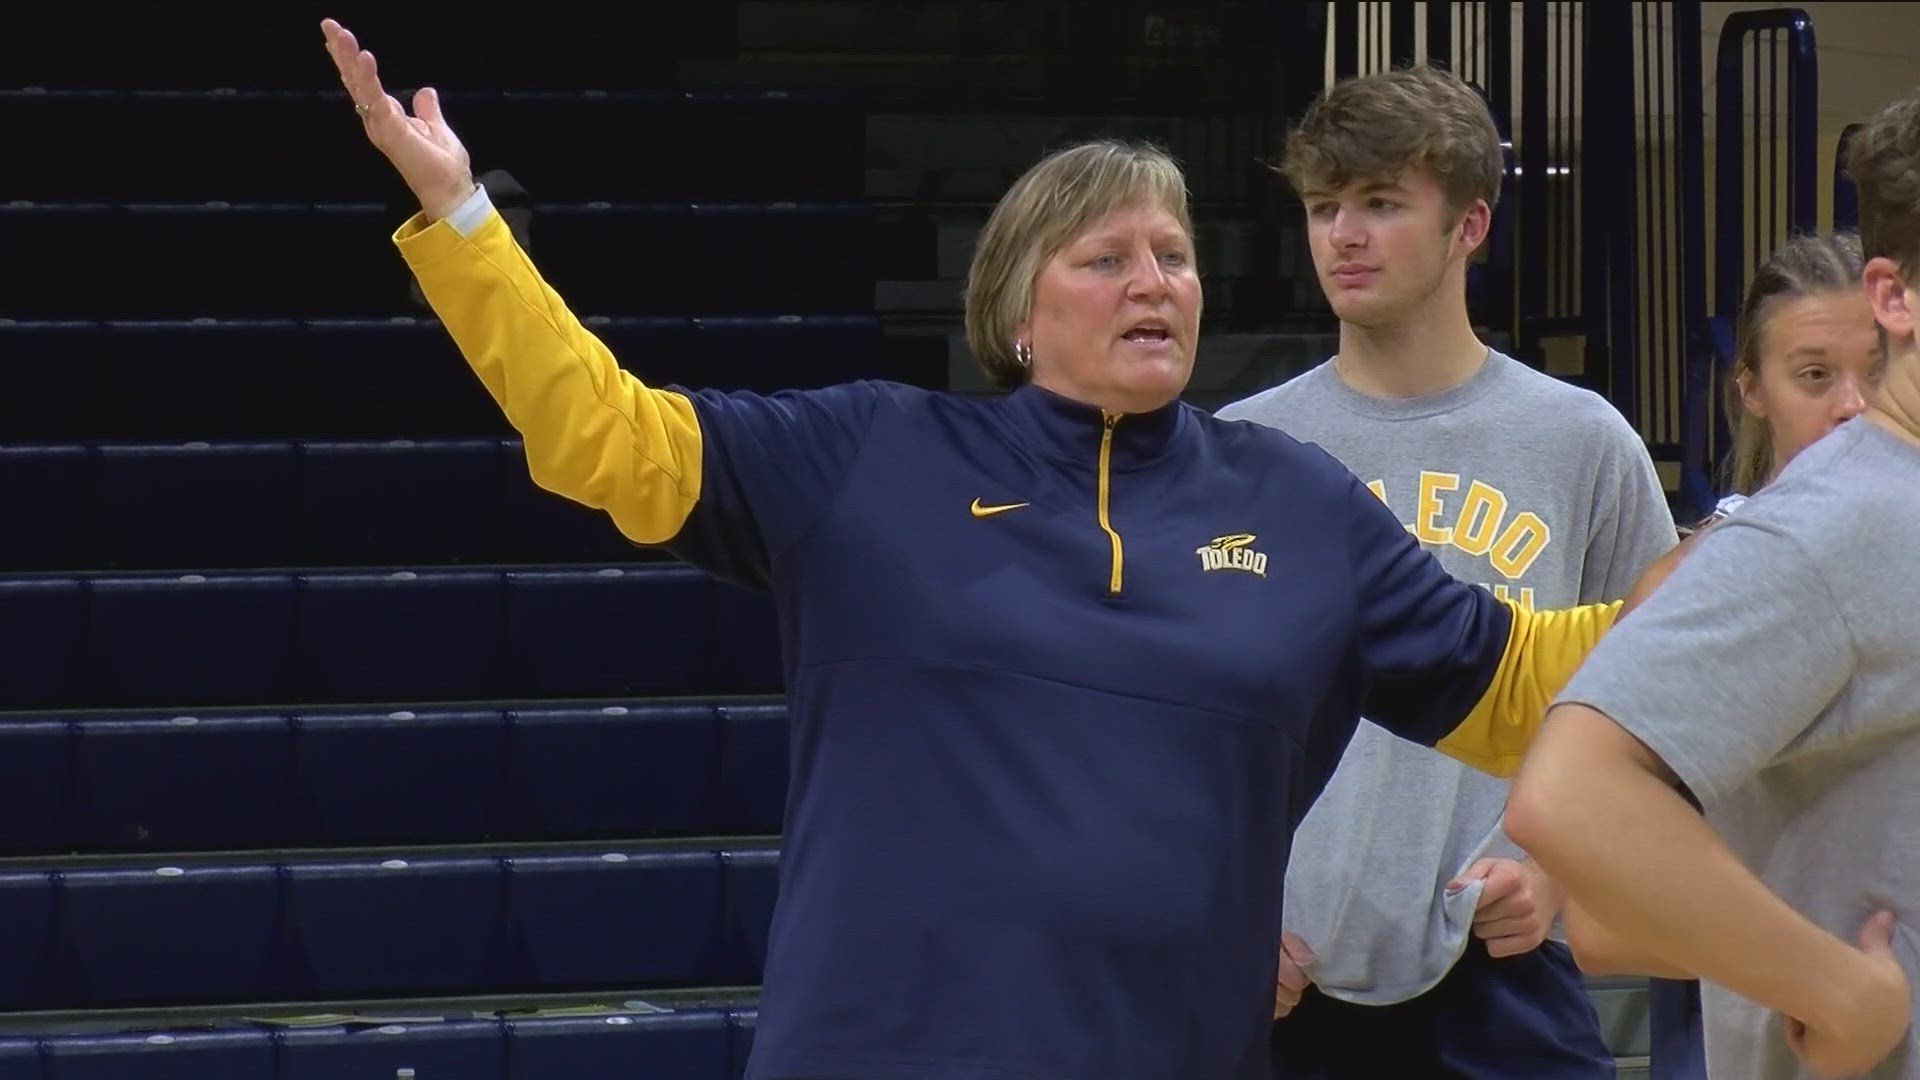 After 16 seasons at the University of Toledo, Tricia Cullop is headed to Florida to be the next head women's basketball coach at the University of Miami.